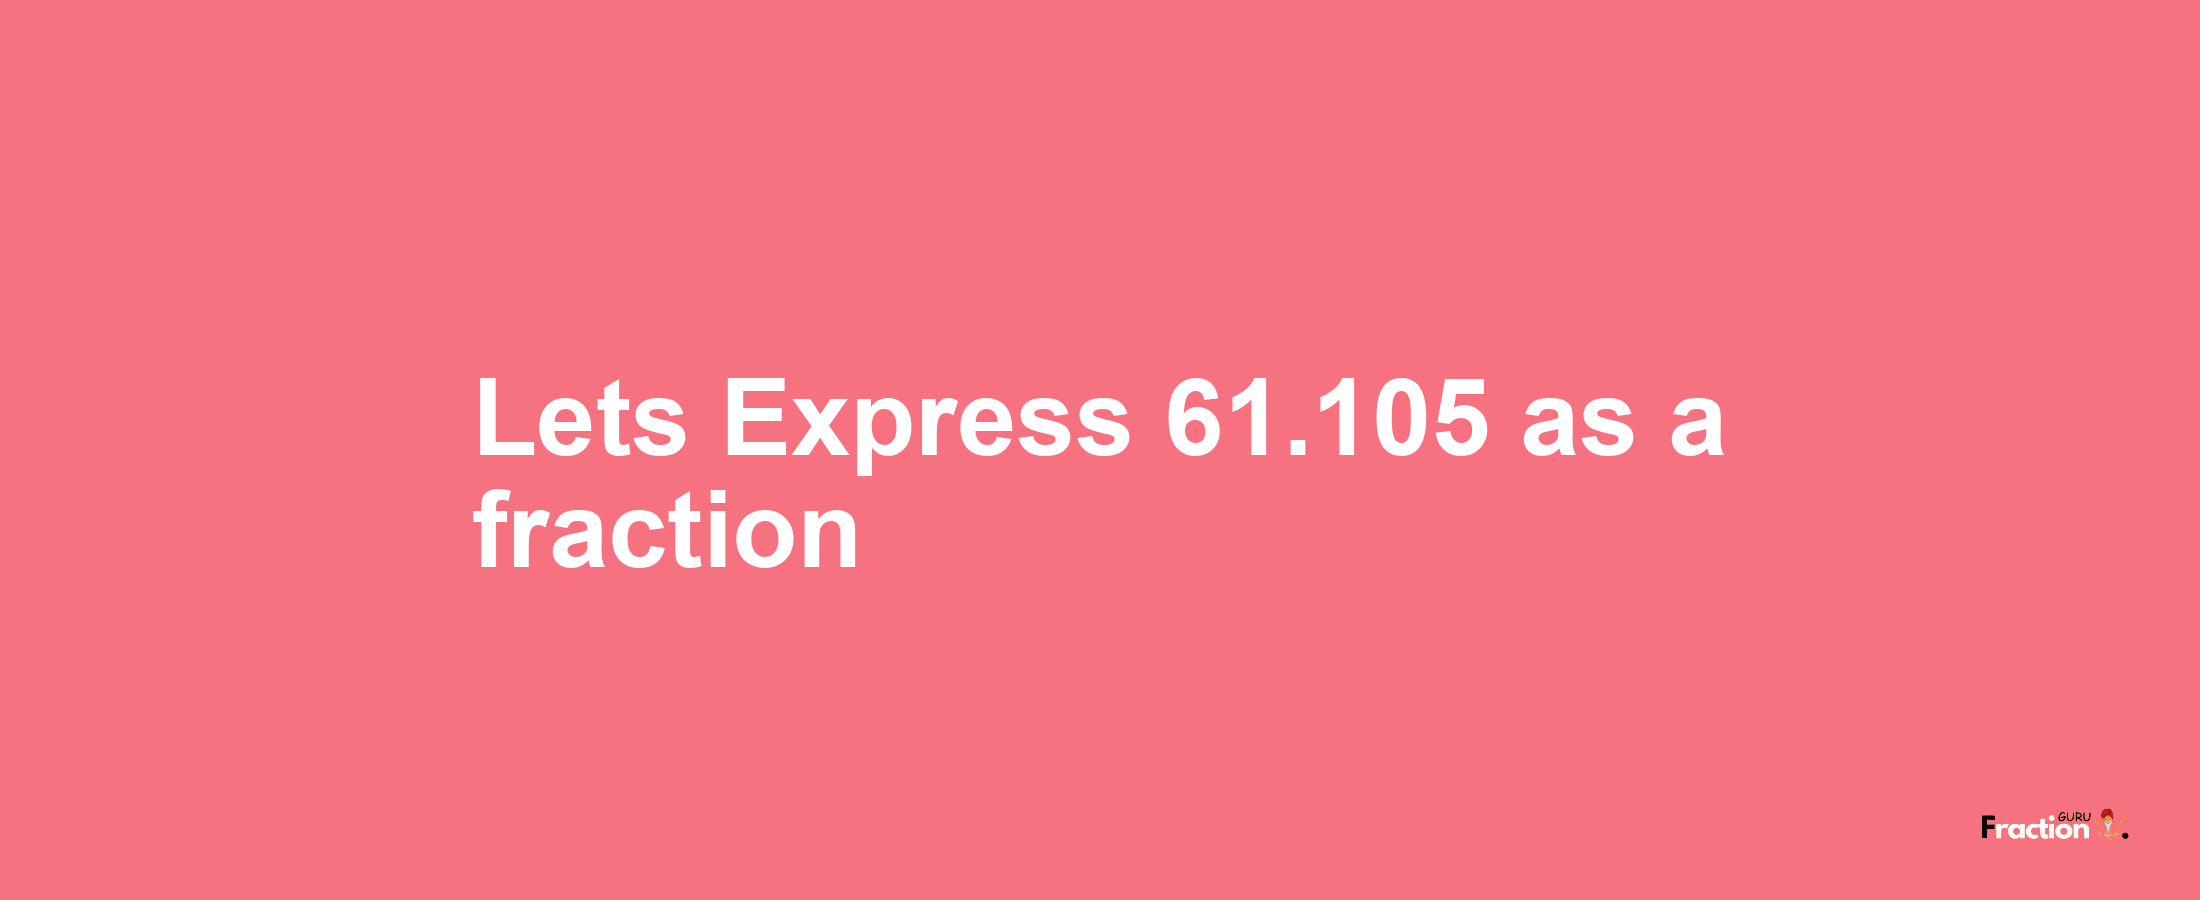 Lets Express 61.105 as afraction